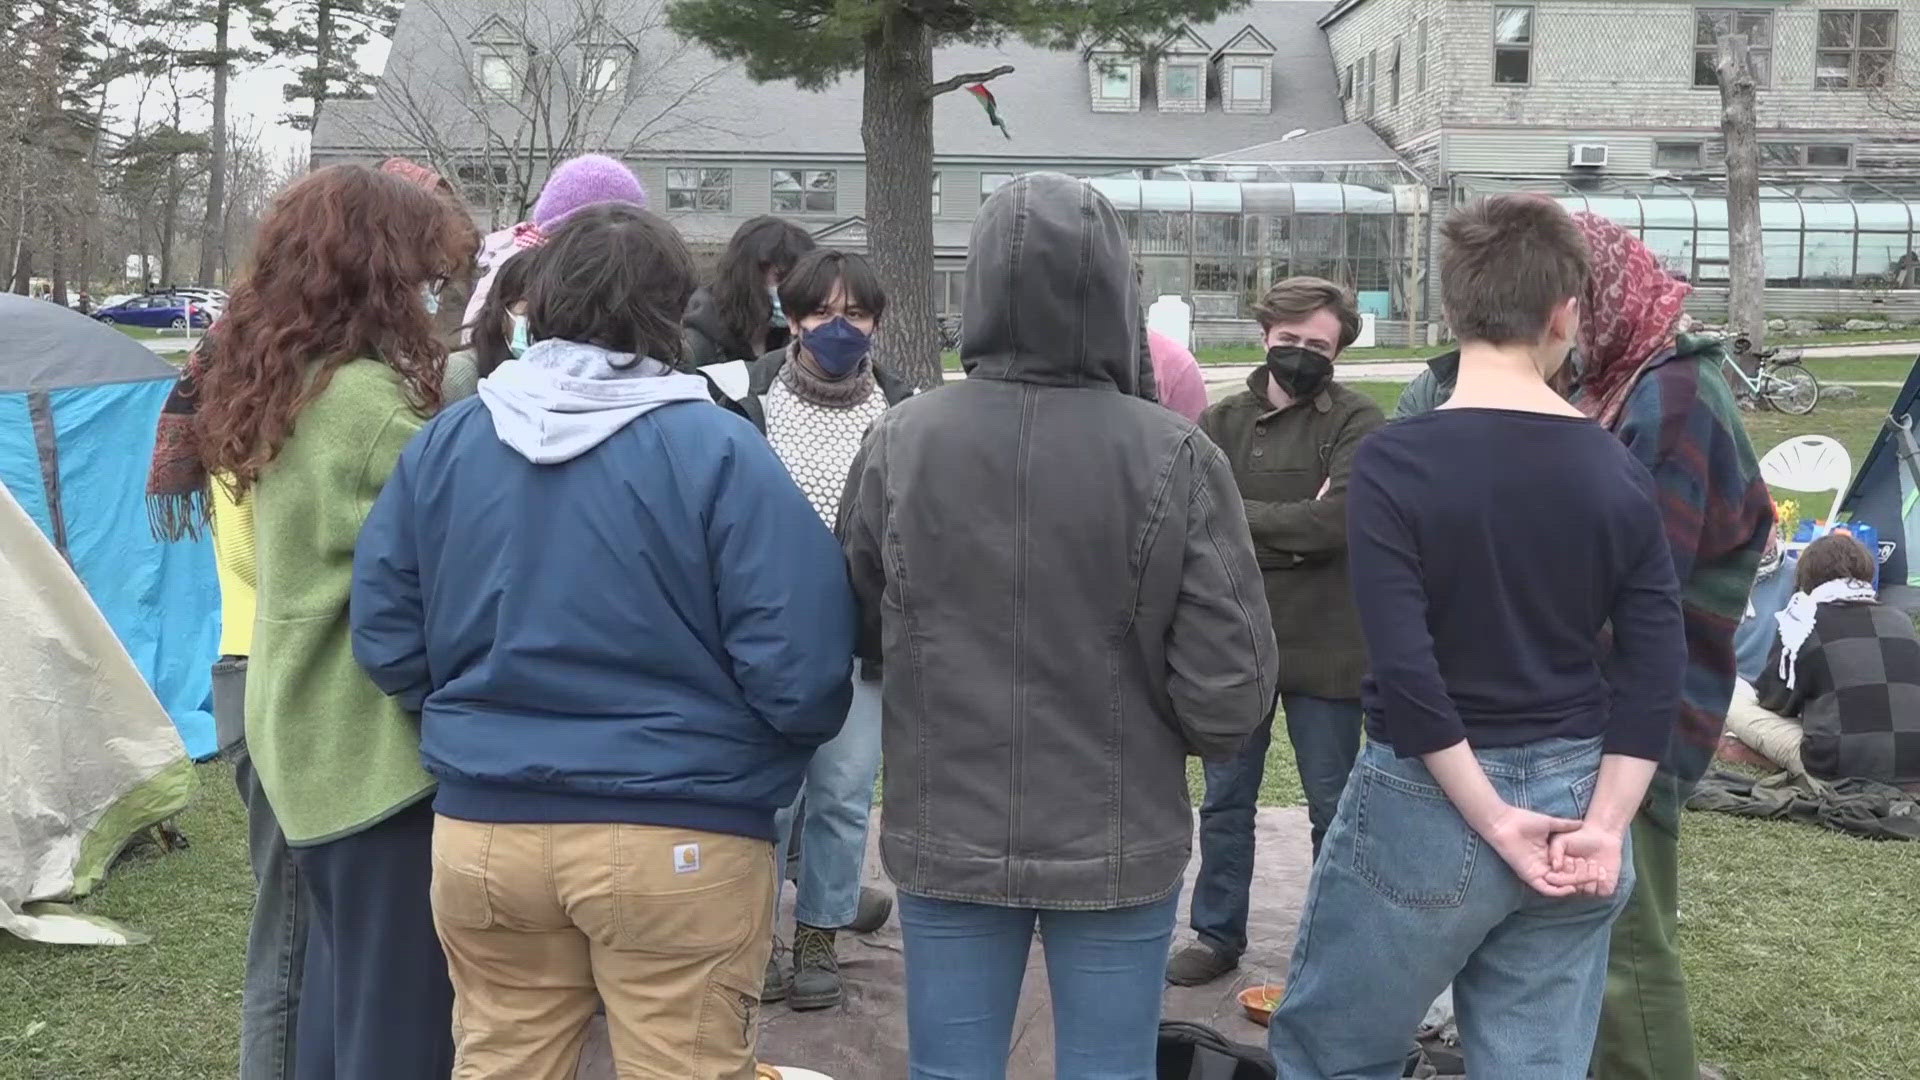 Students at the Bar Harbor college are calling for an end to what they say is an ongoing genocide.